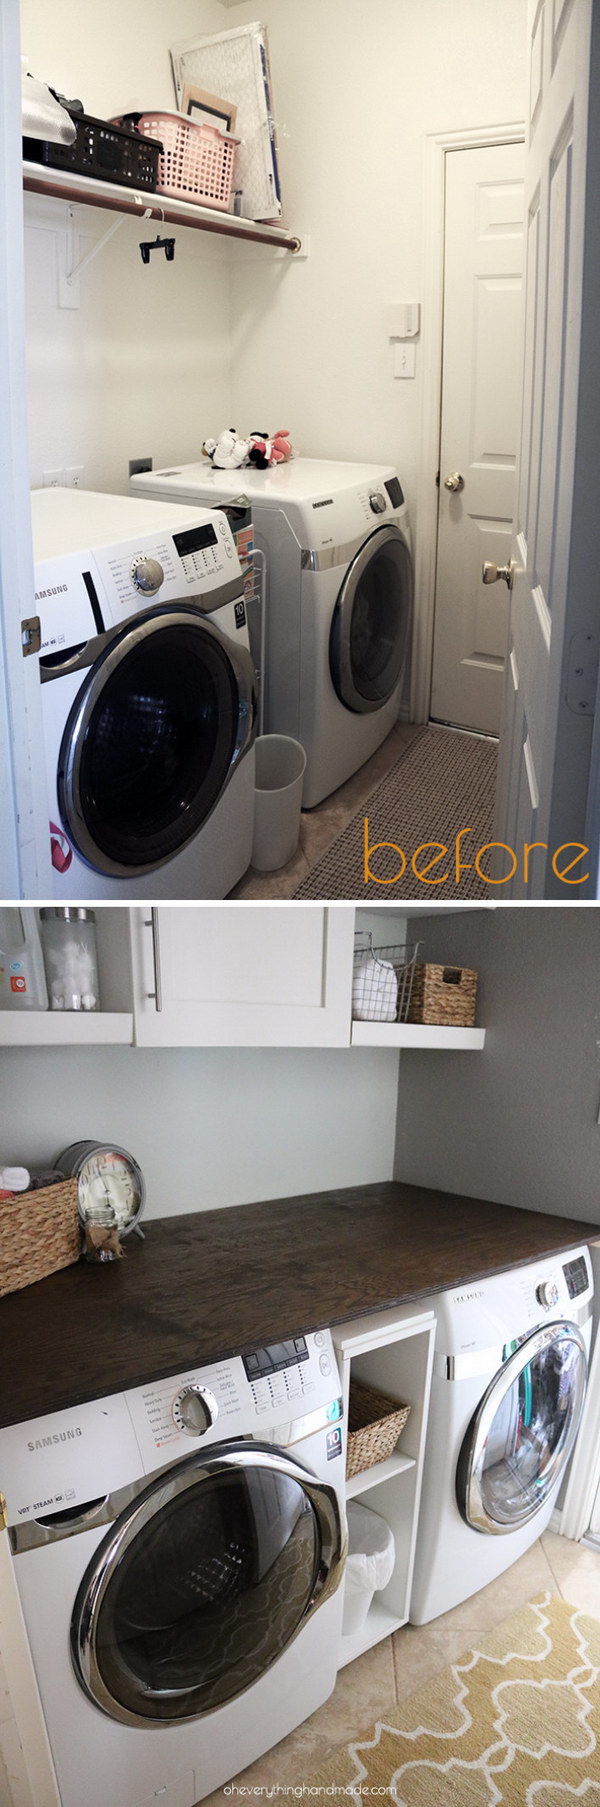 Laundry Room Makeover: Adding a DIY Wooden Counter and Wall Cabinet. 